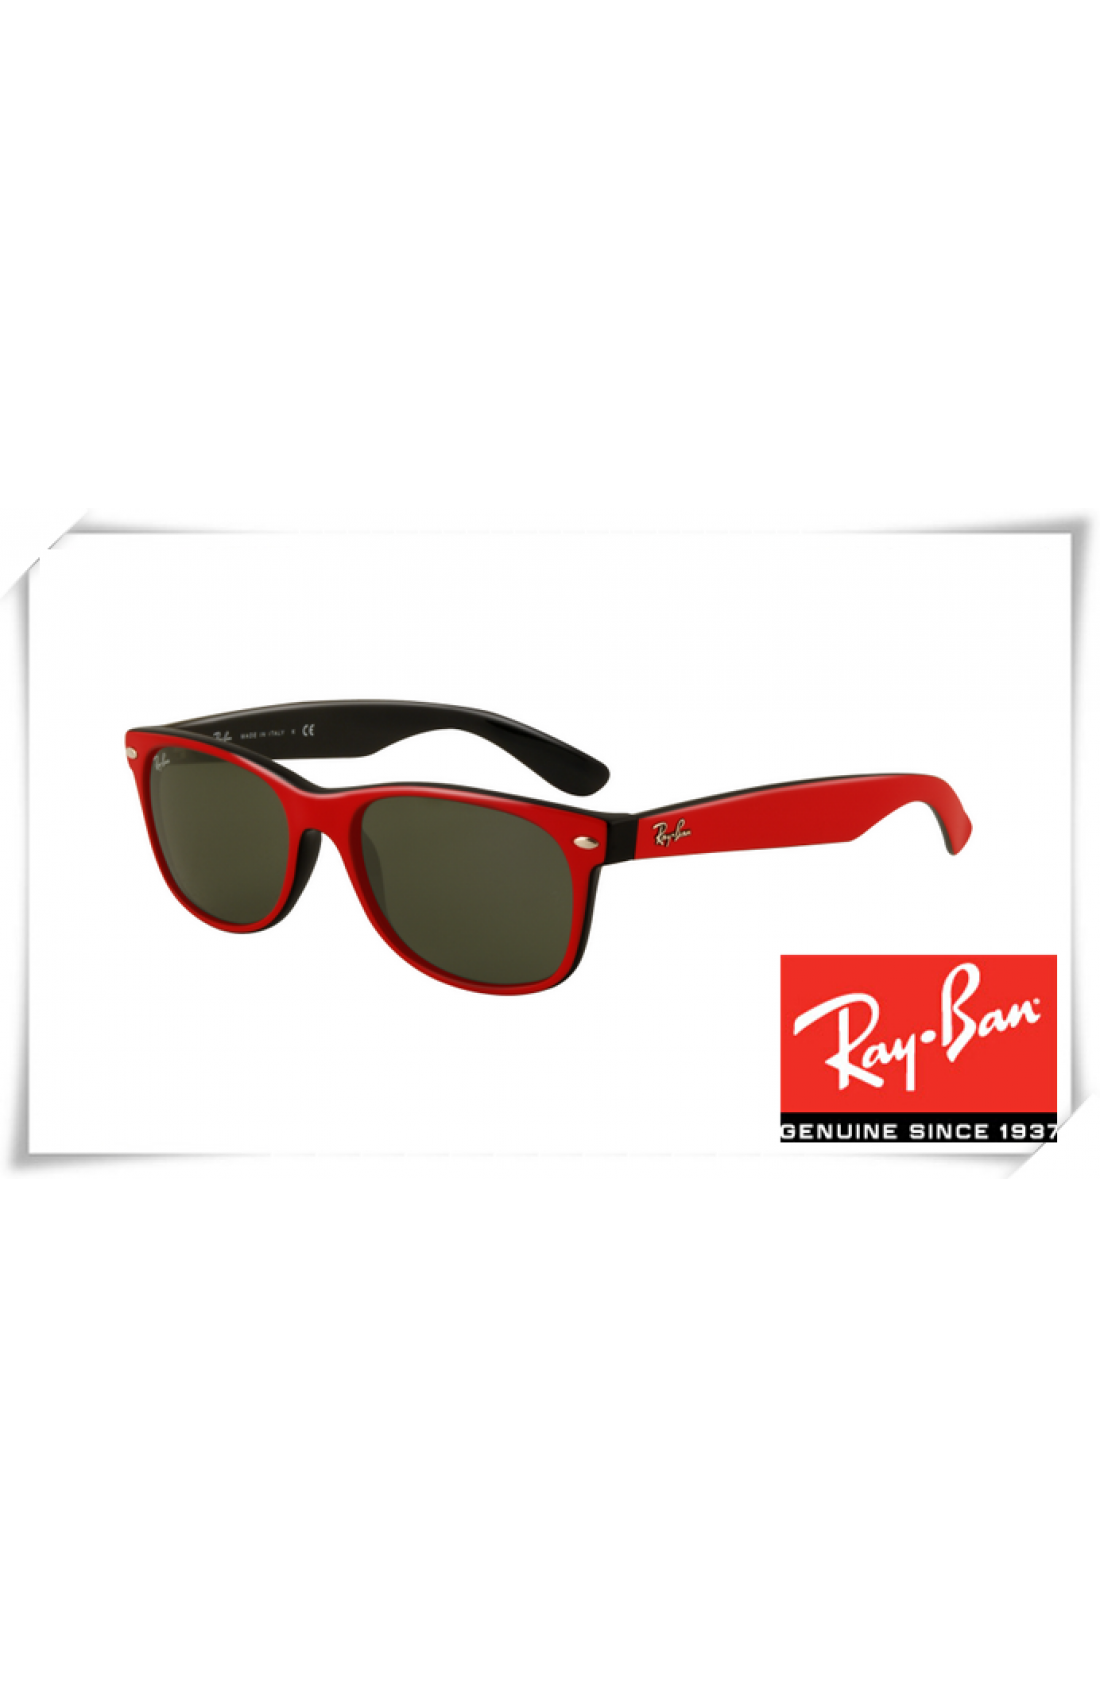 ray ban red and black frames